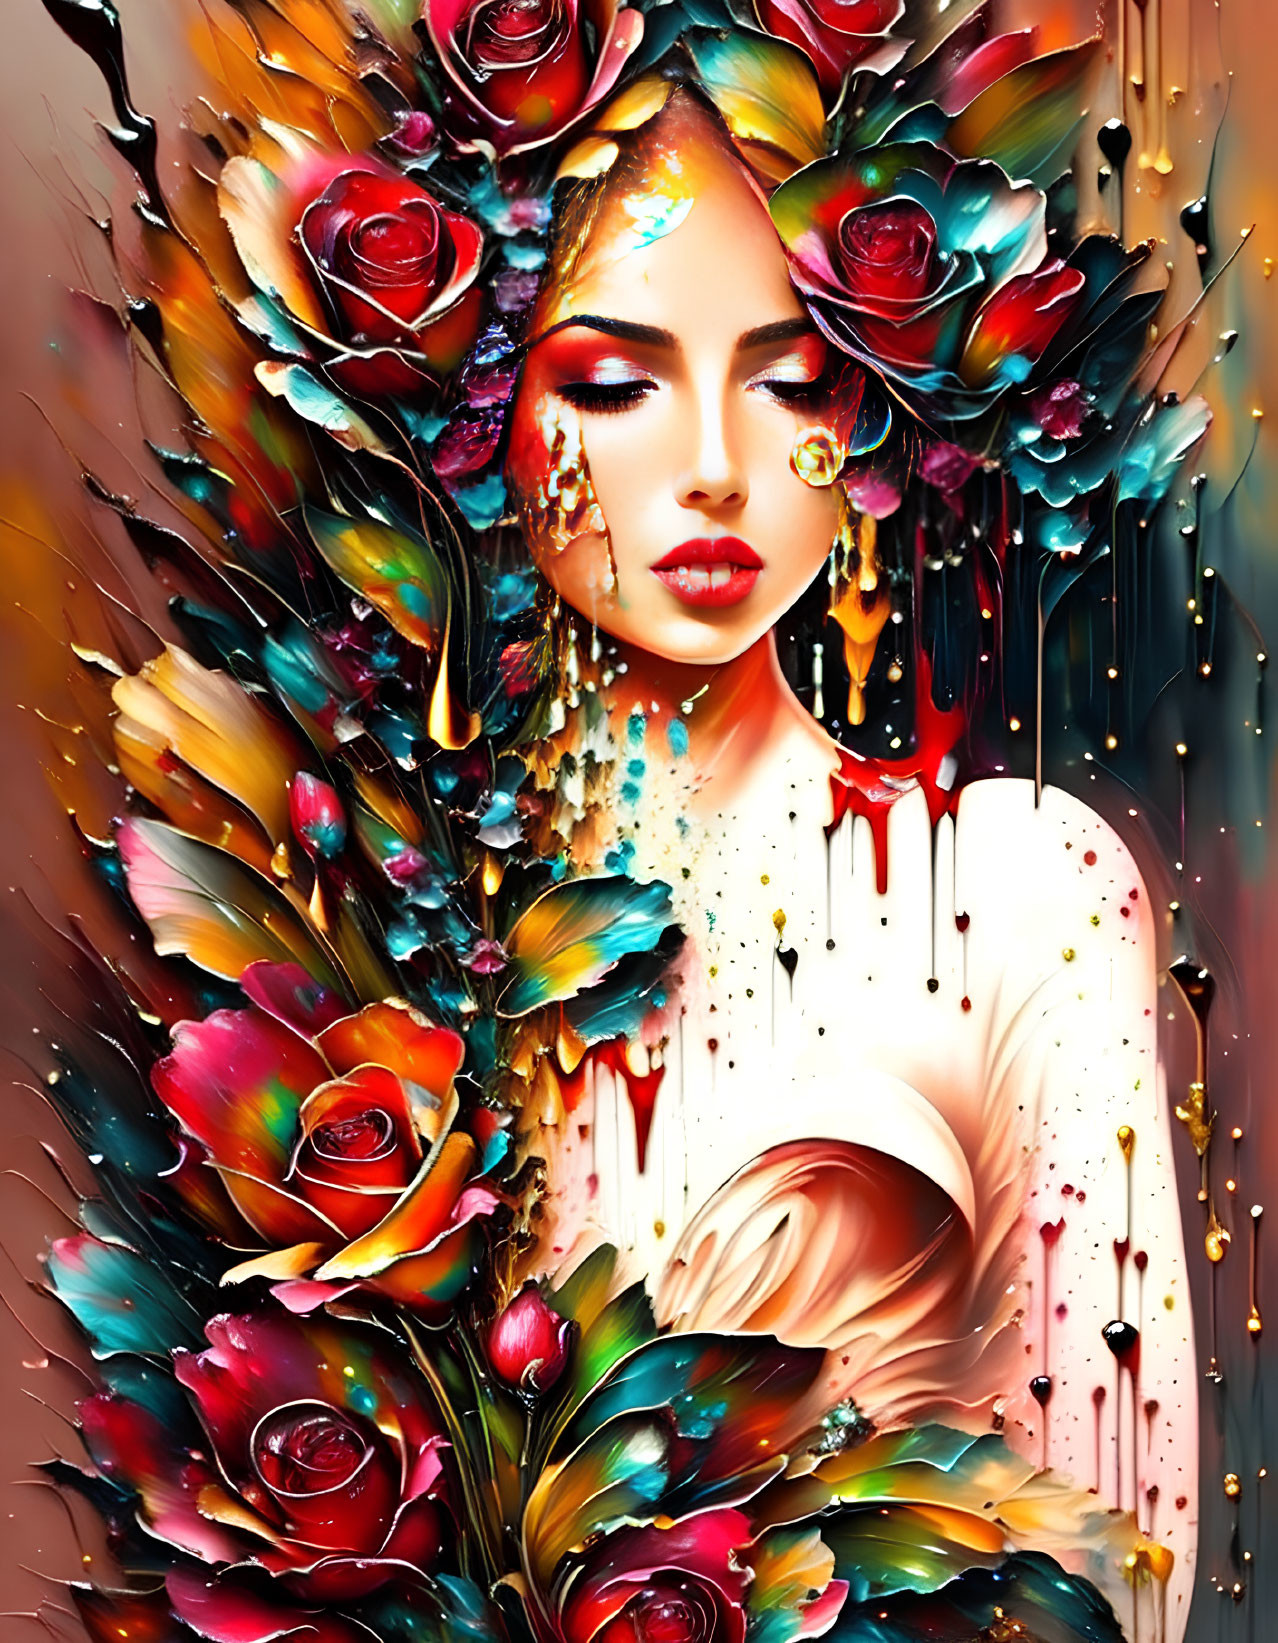 Colorful digital artwork of a woman with floral crown and abstract rose motifs